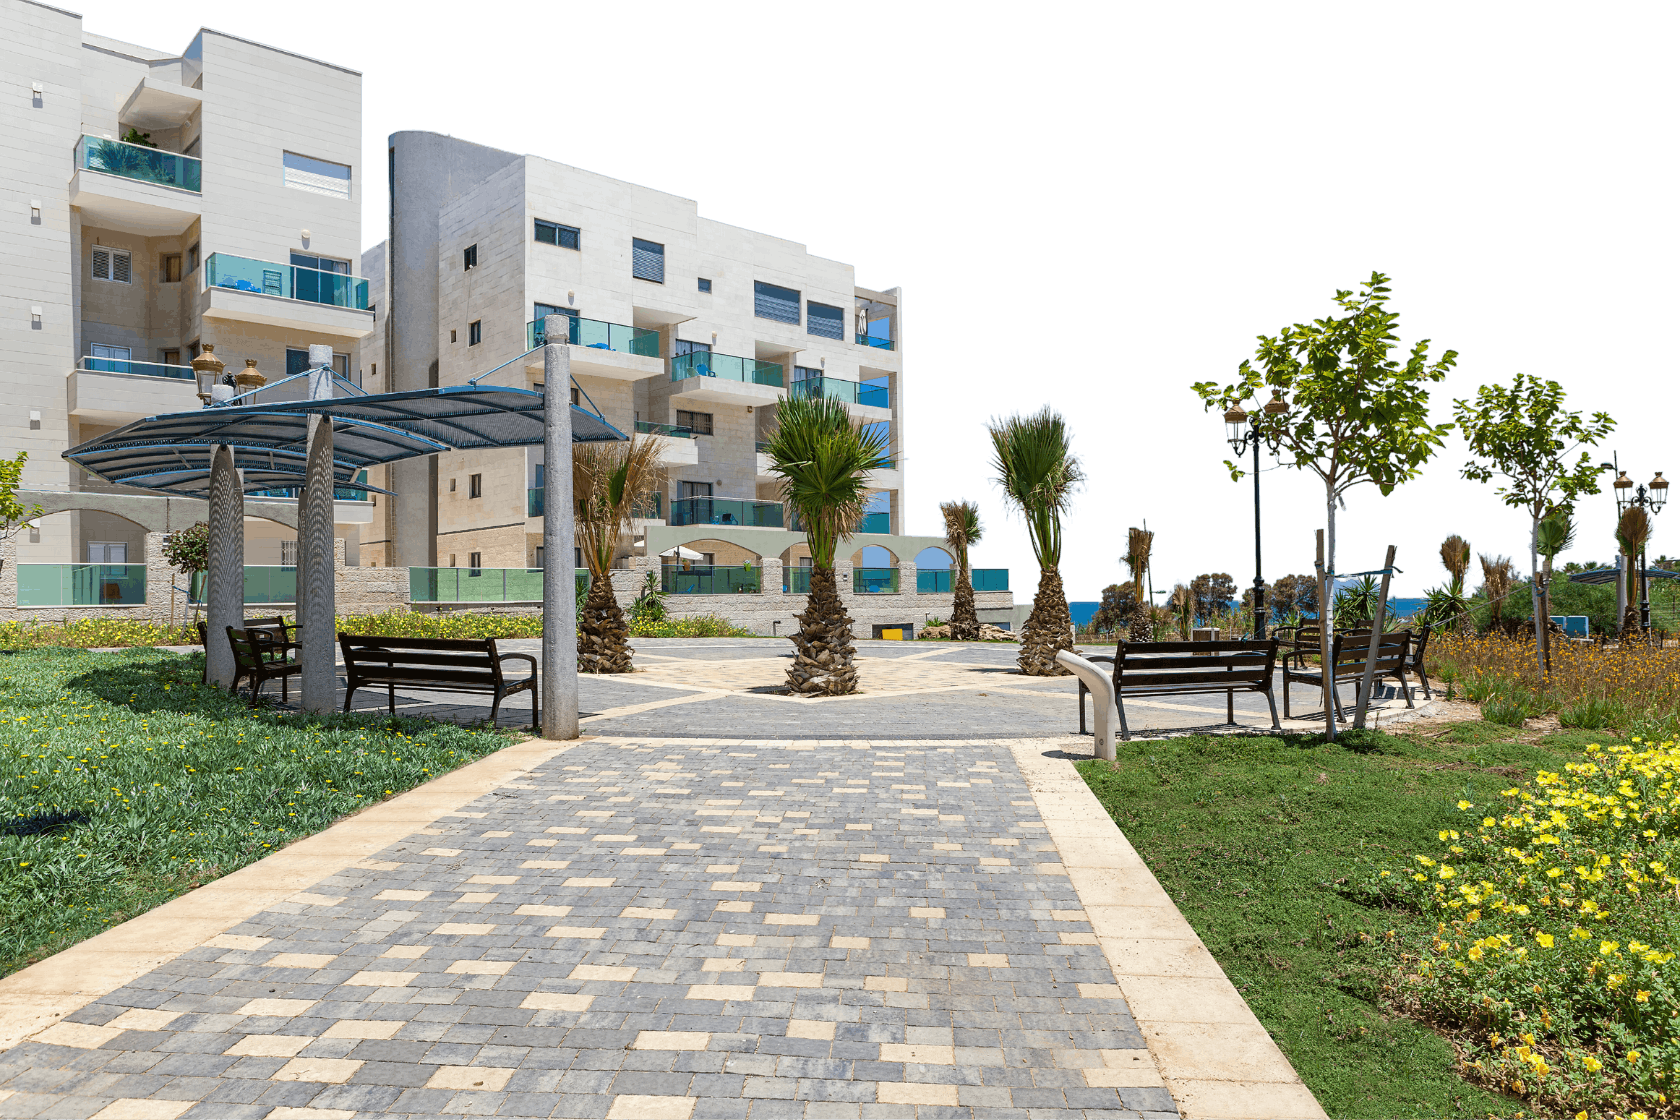 Real Estate Market in Israel: January-March 2023